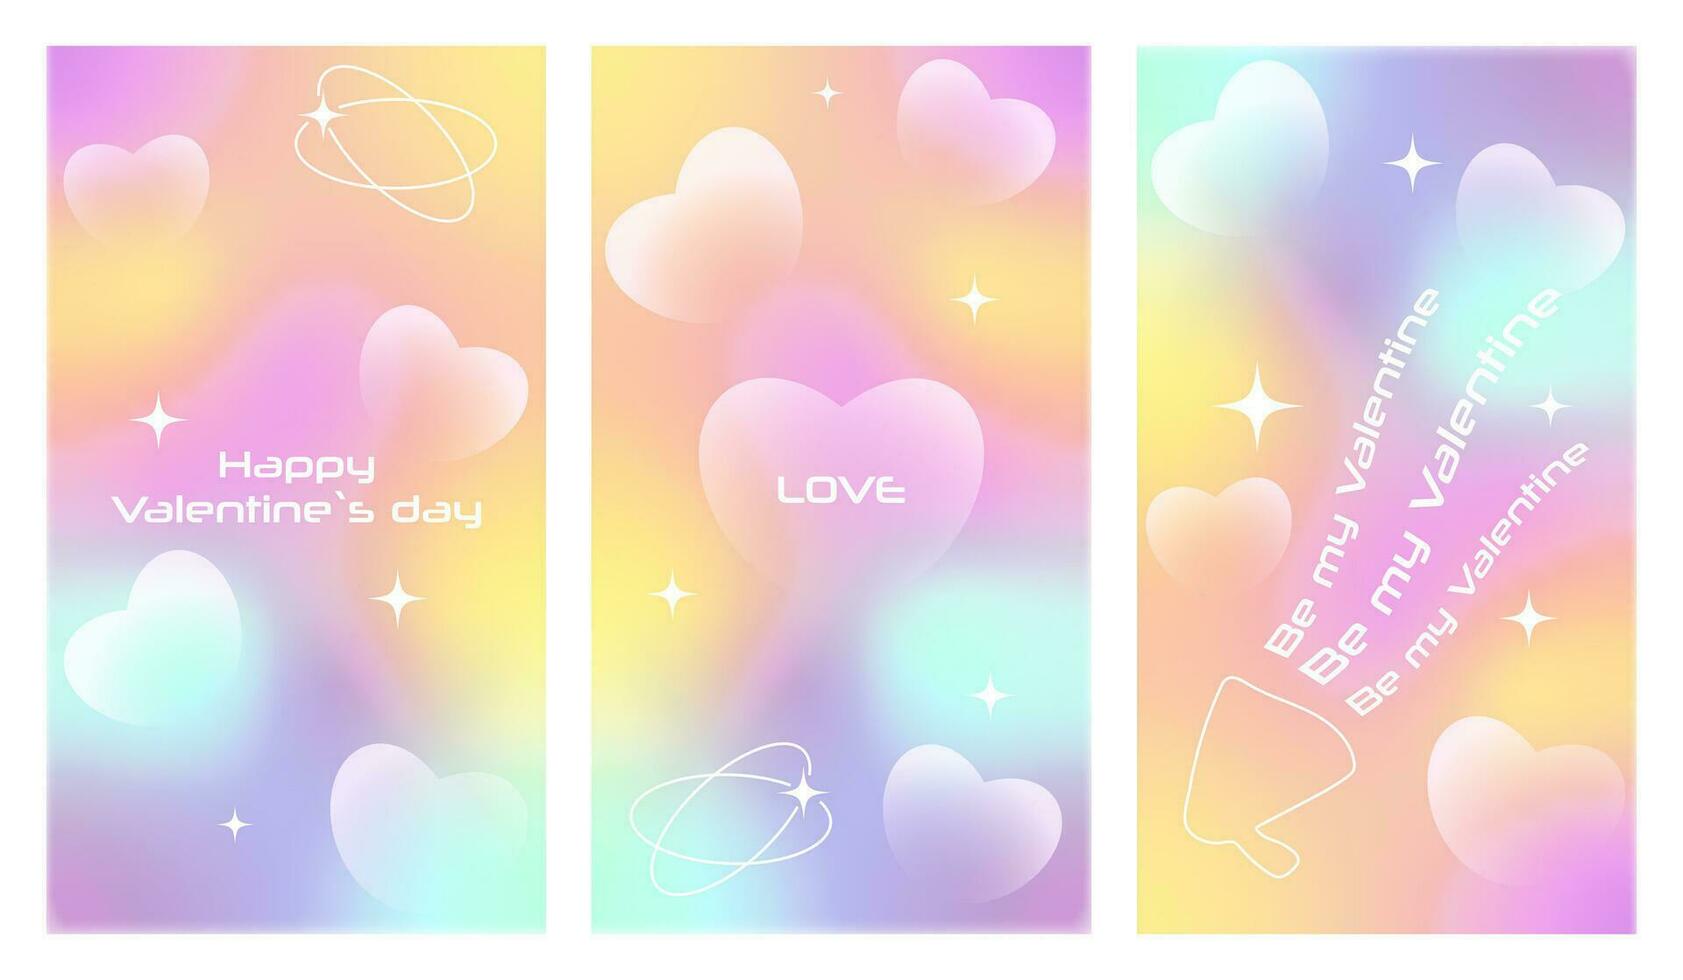 Templates of Valentines day and Love card, banner poster cover set. Trendy minimalist aesthetic with gradients and typography, y2k background. Pale pink yellow, purple vibrant colors. Be my Valentine vector